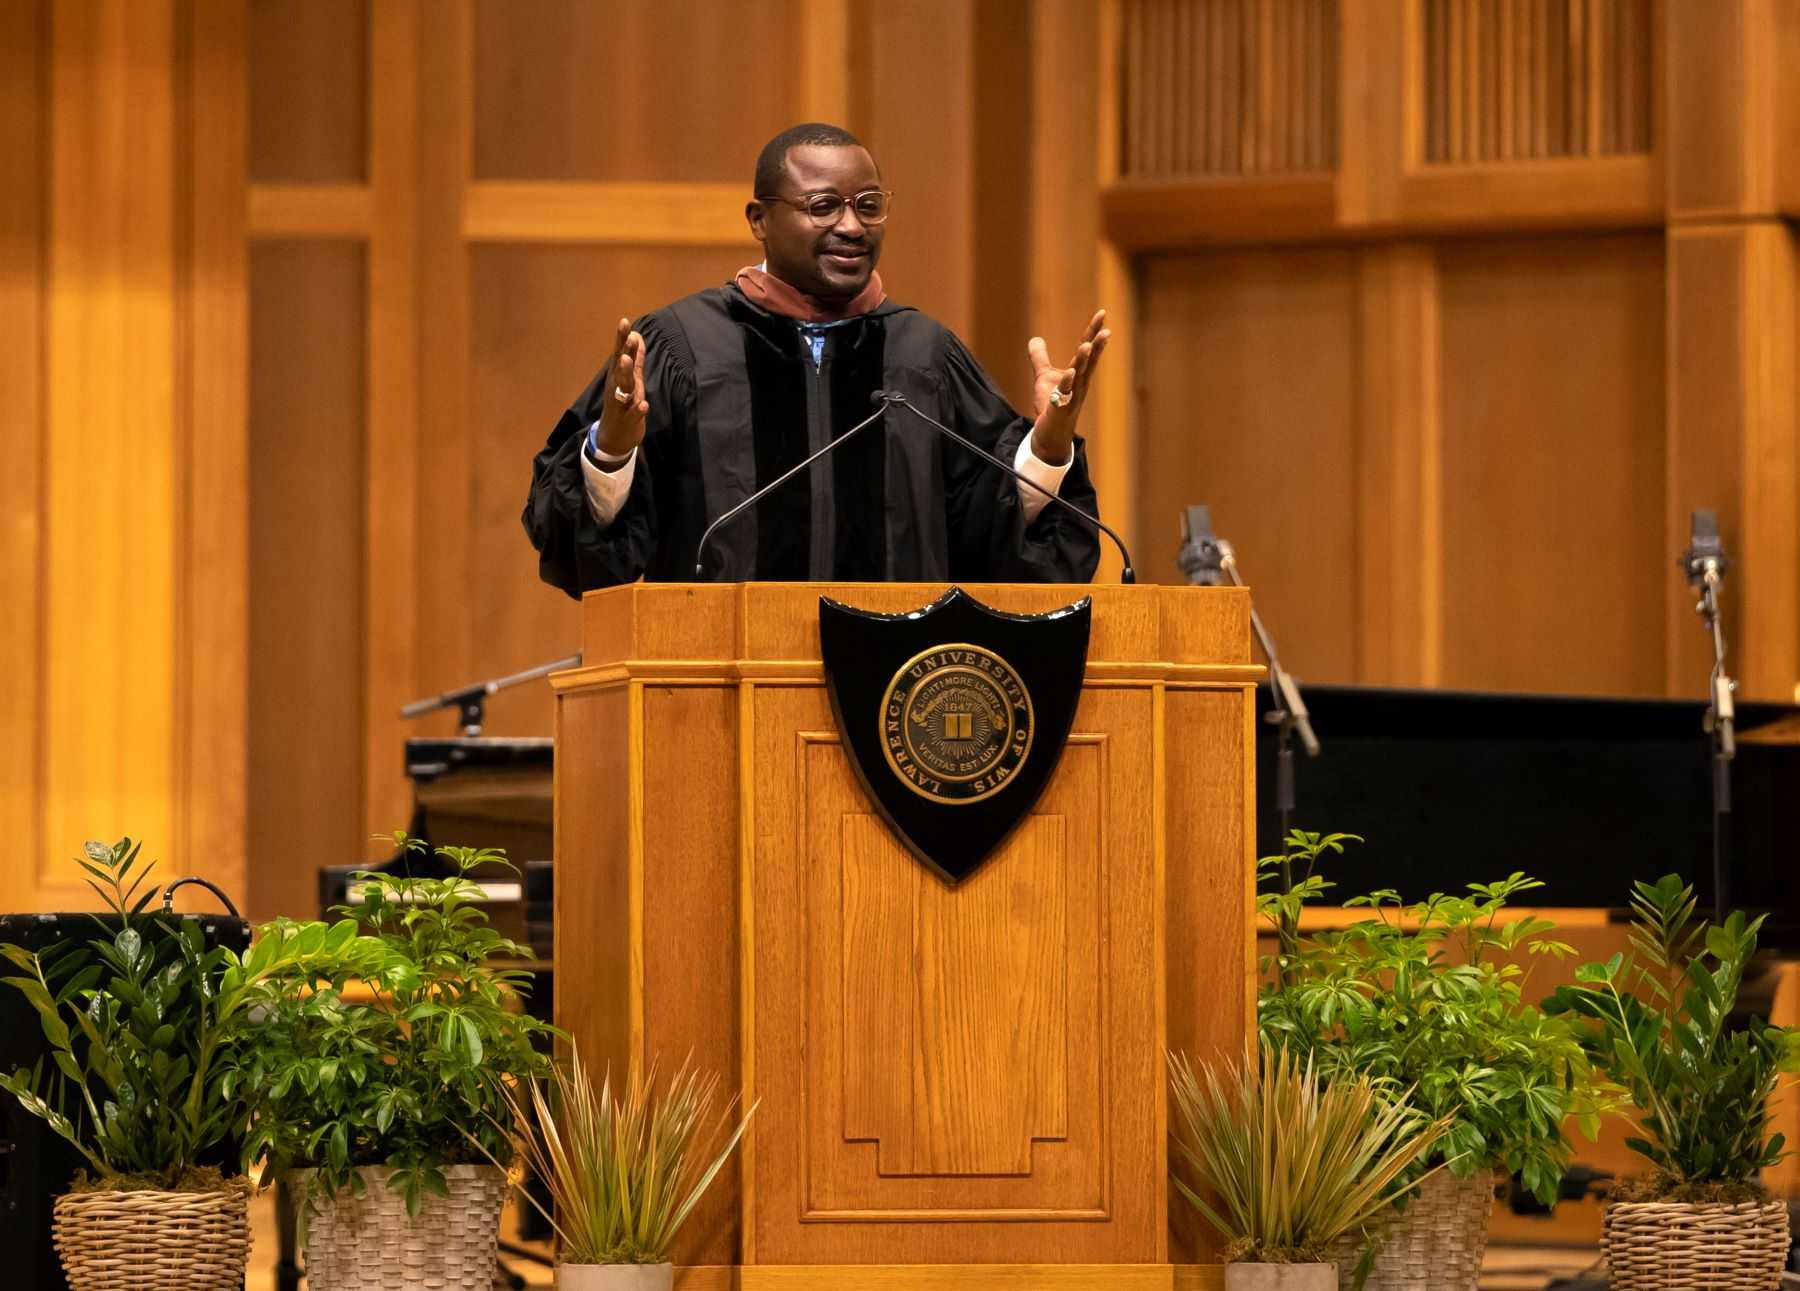 Robert Battle speaks at the podium on stage of Memorial Chapel.